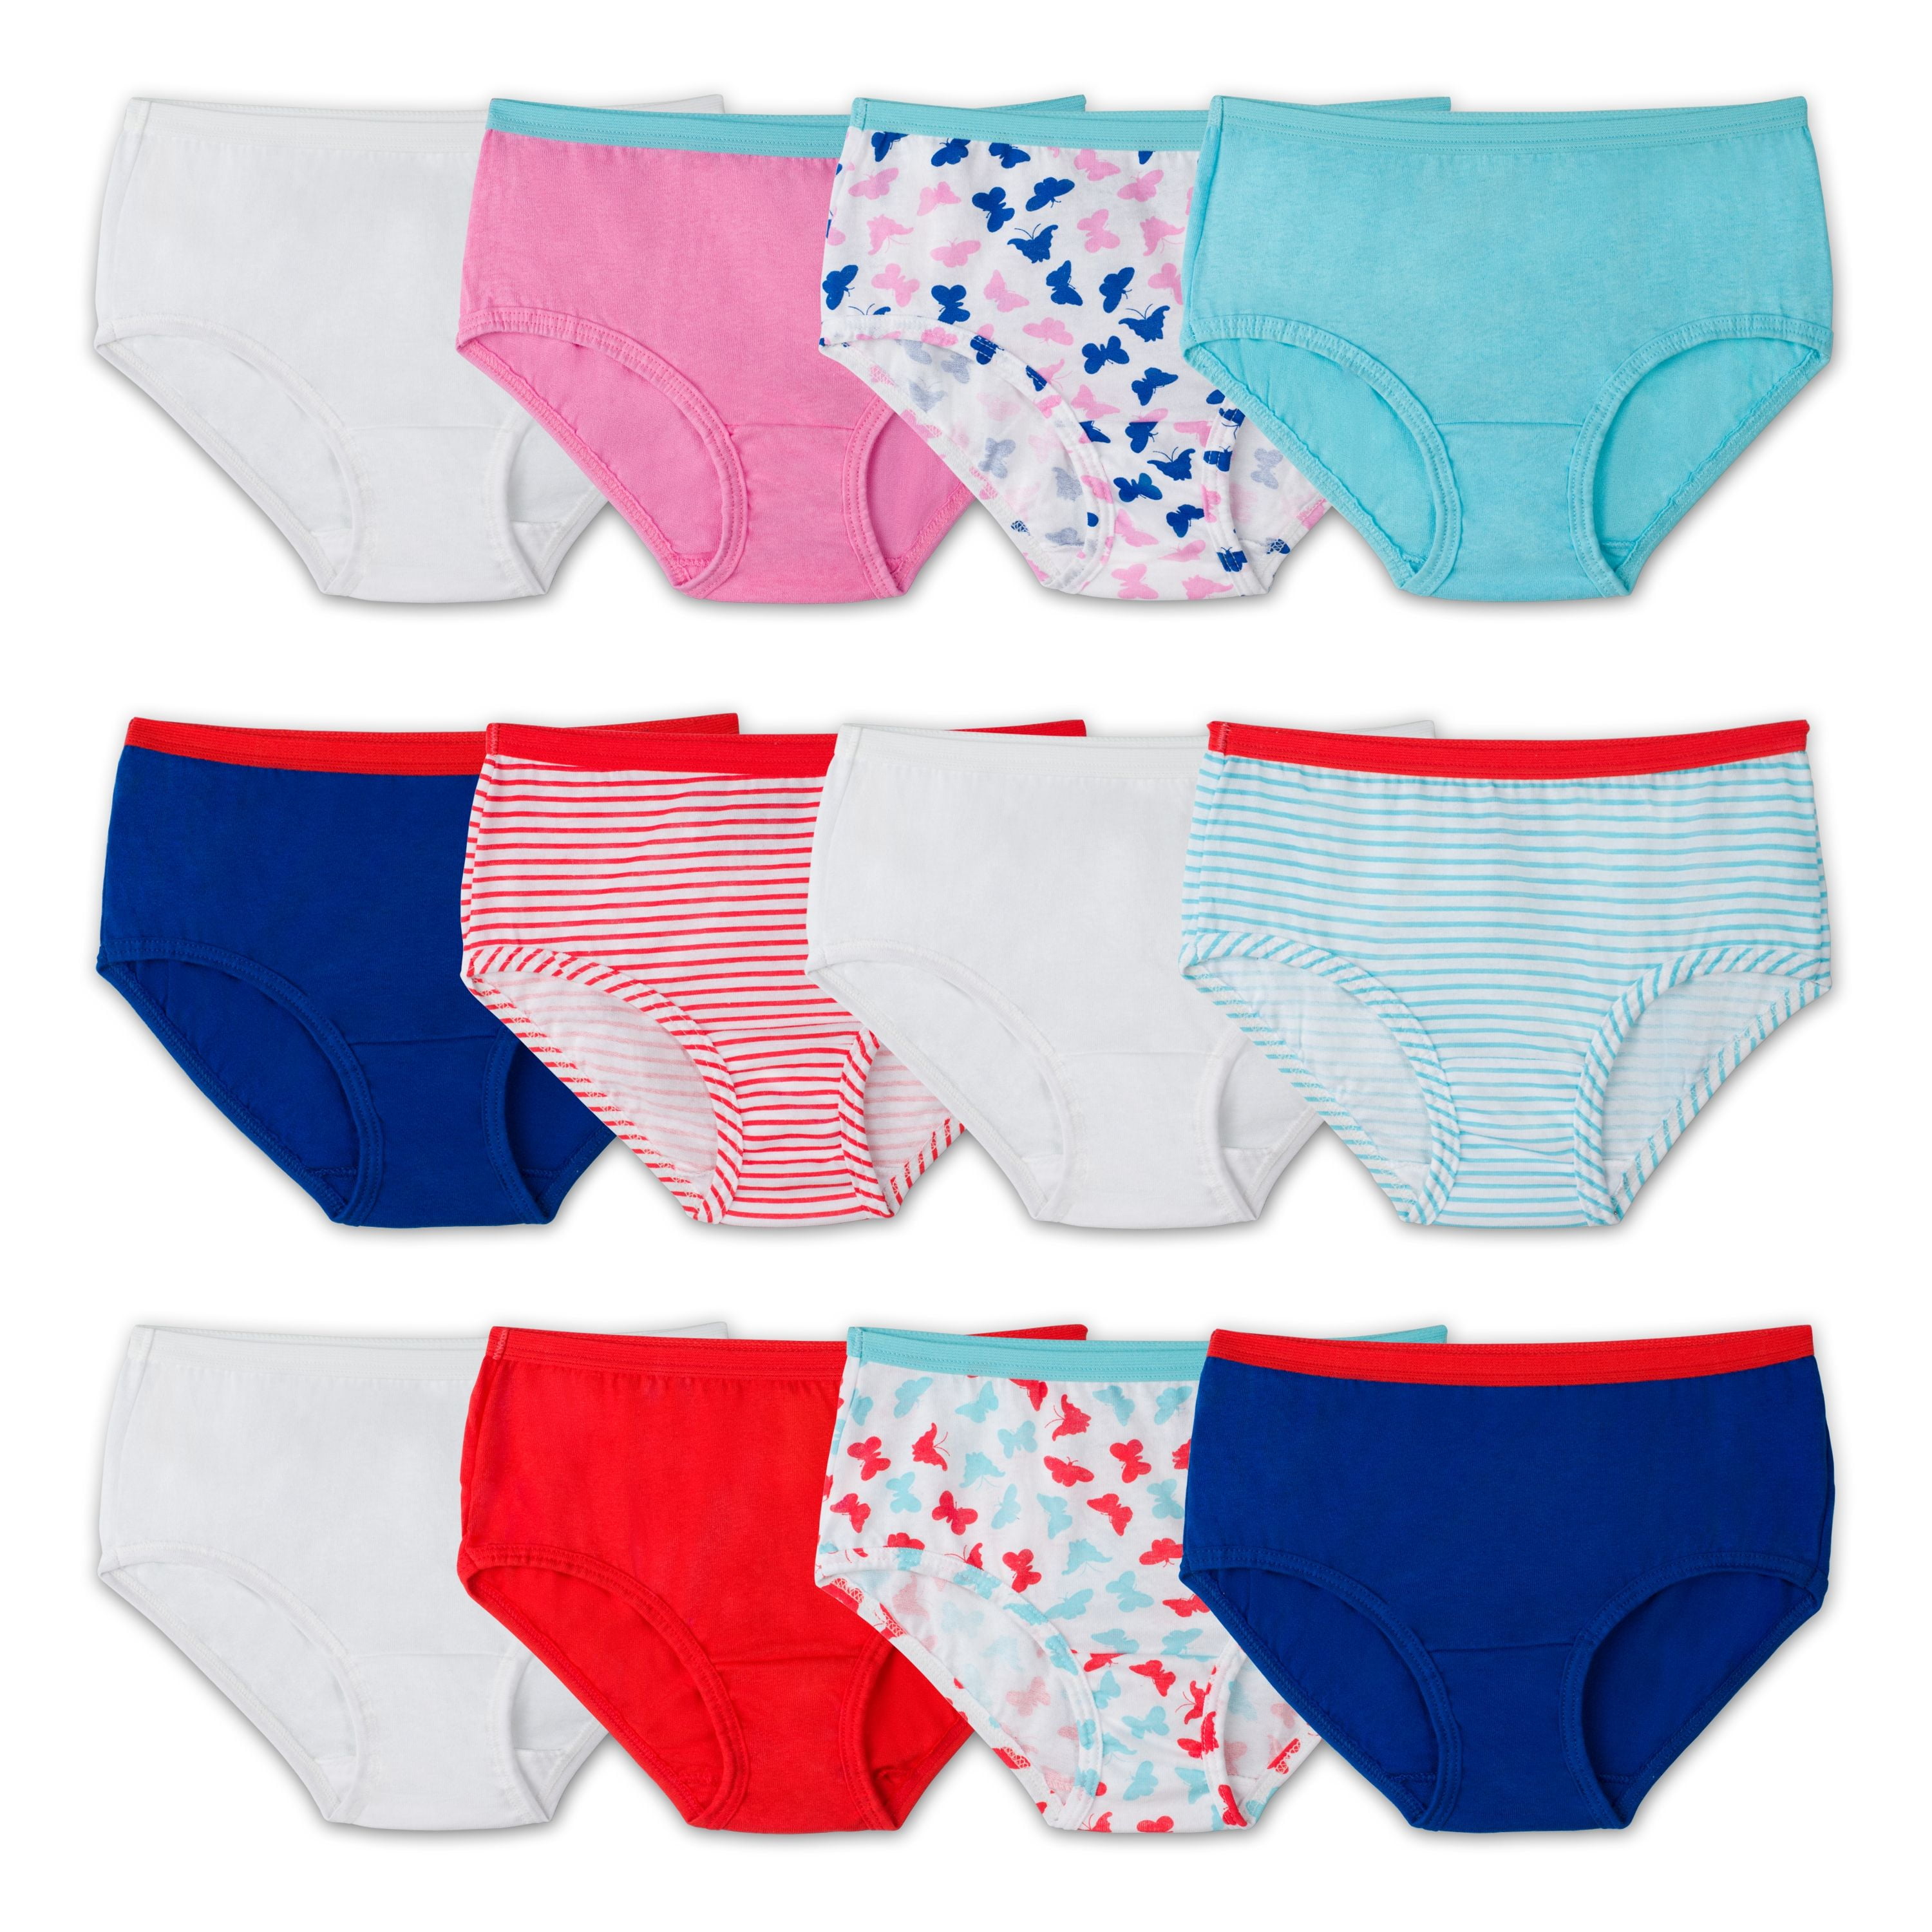 Fruit of the Loom Girls Assorted Cotton Brief Underwear, 12 Pack